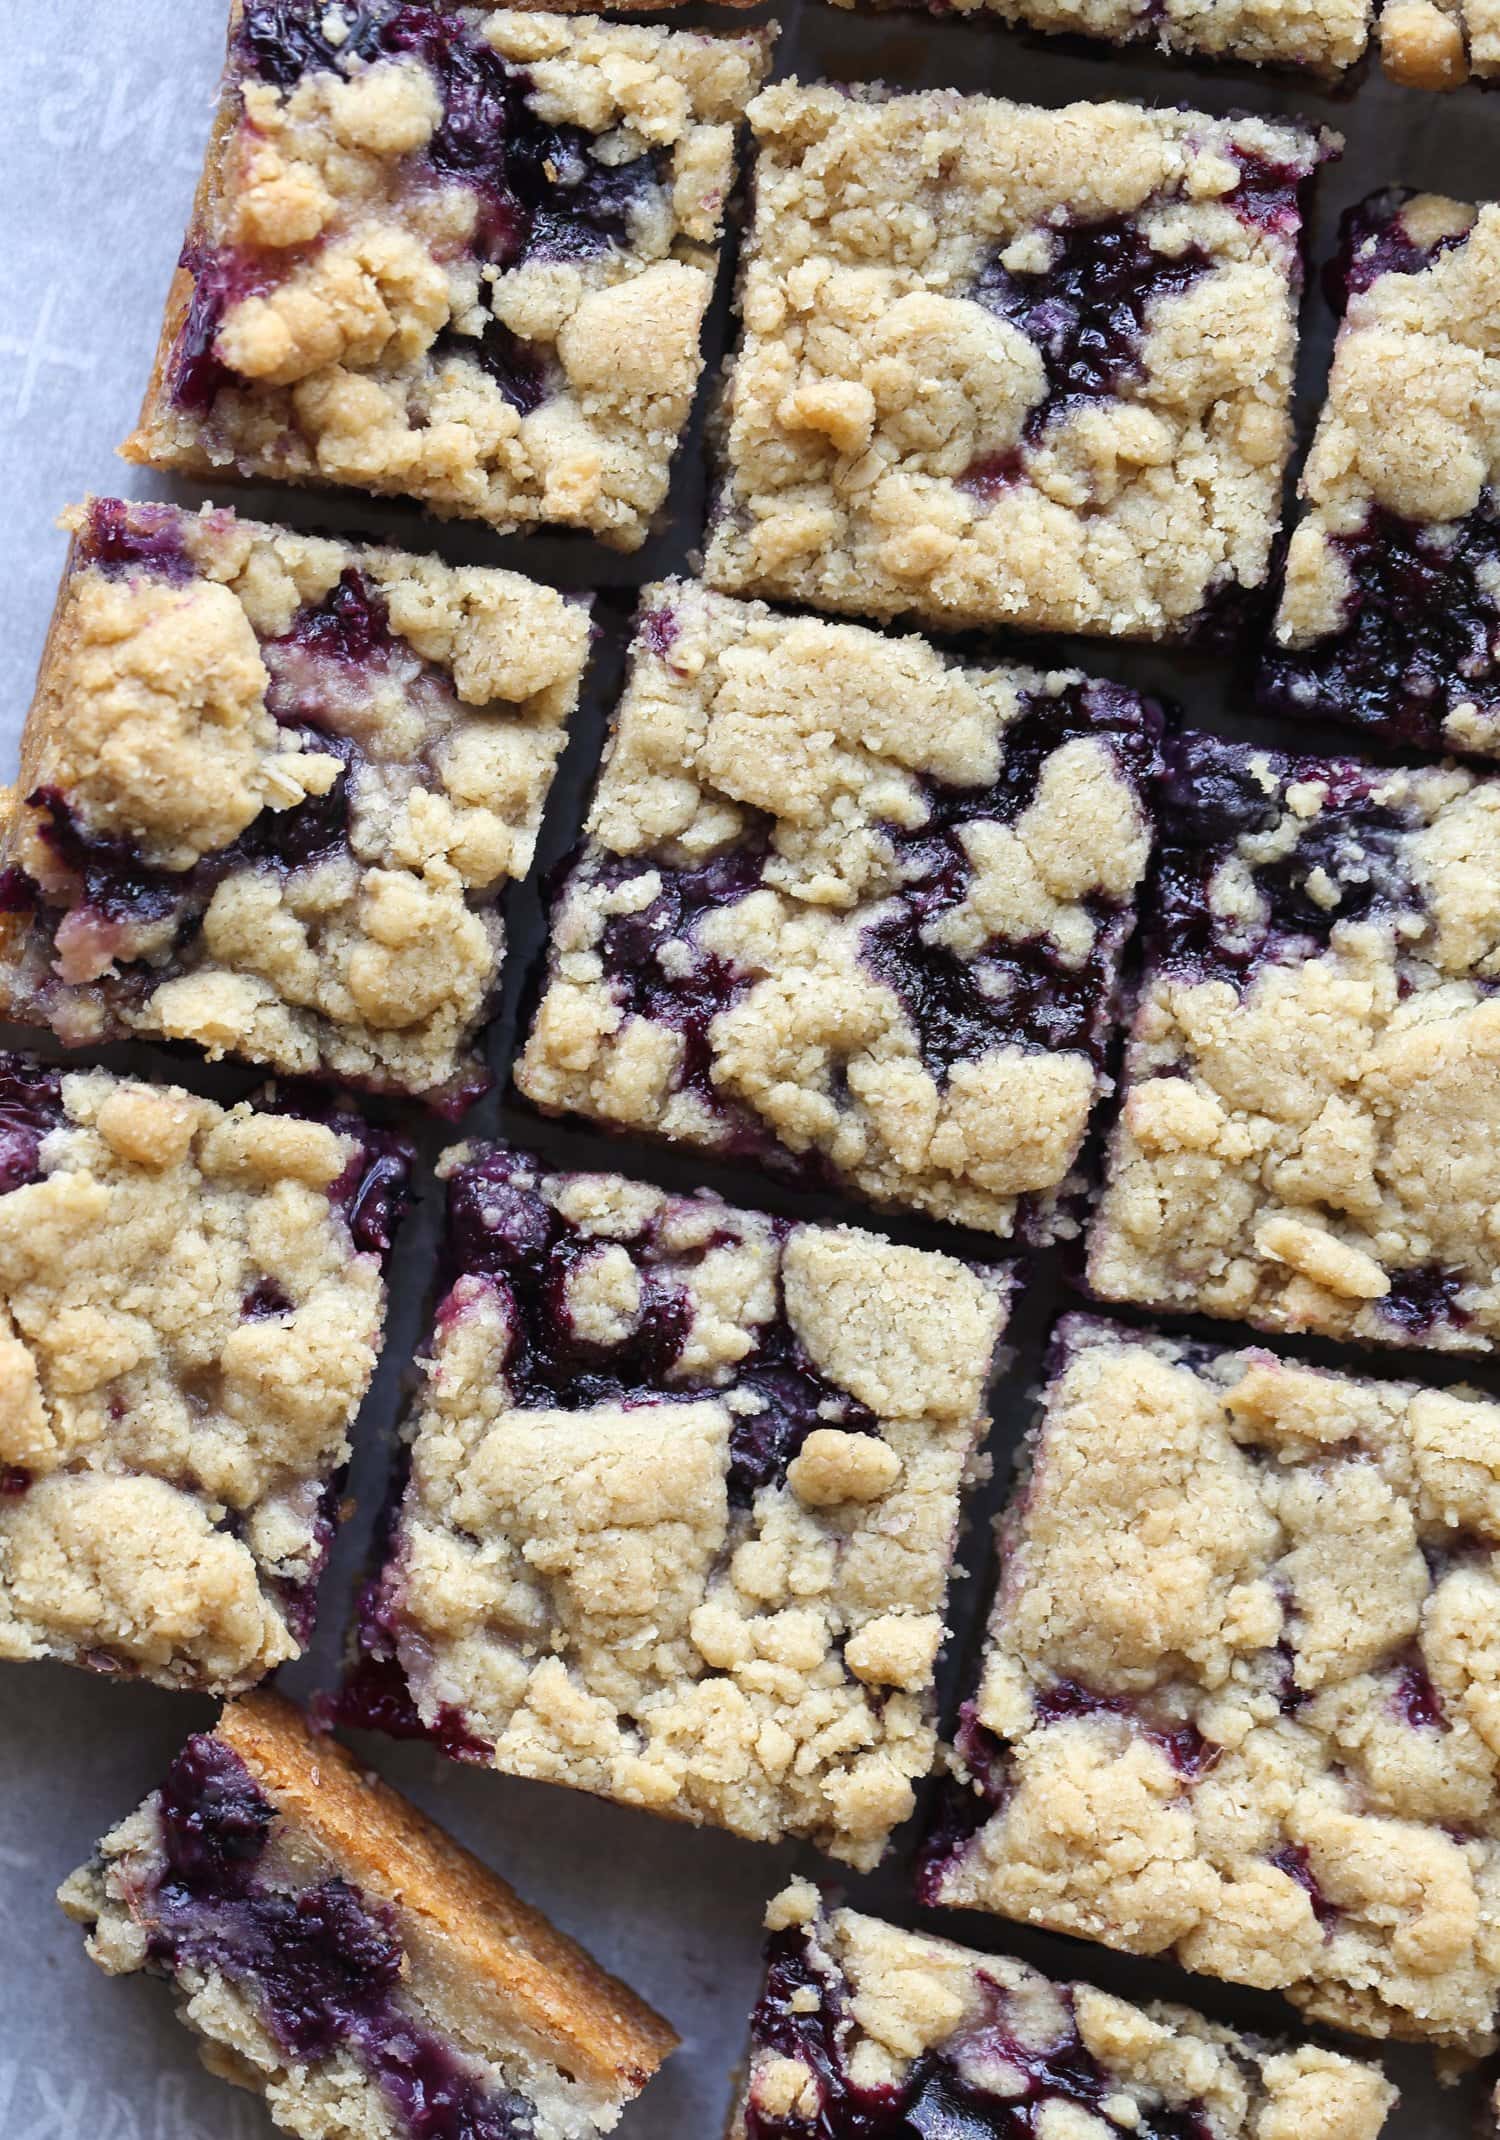 Cut a square from the top of a blueberry crumble bar